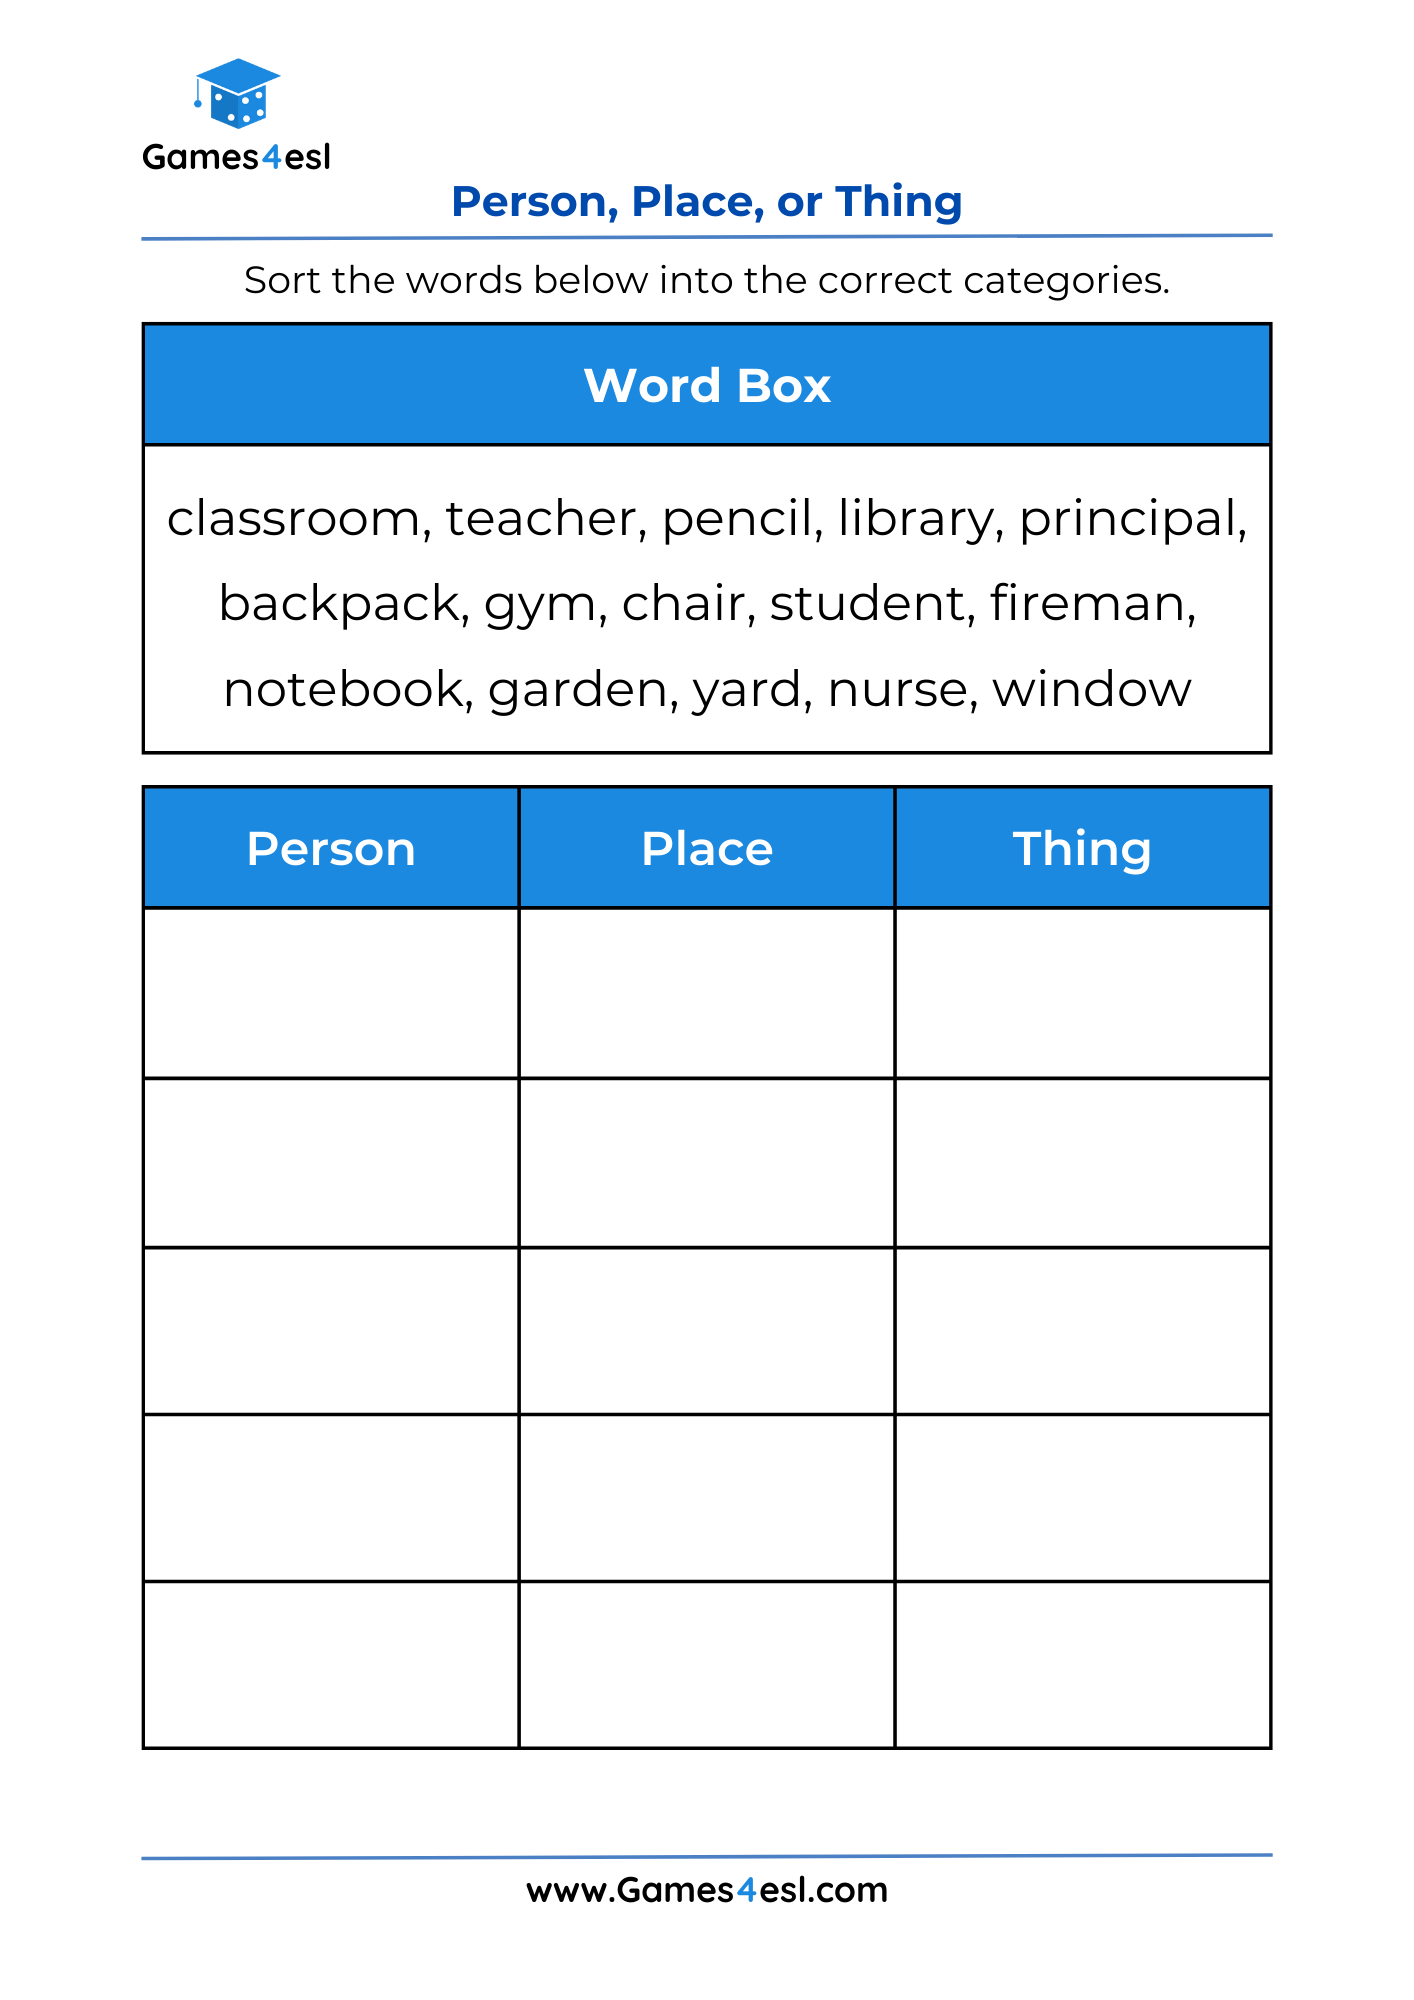 A Grade 2 Worksheet for teaching person, place, or thing.